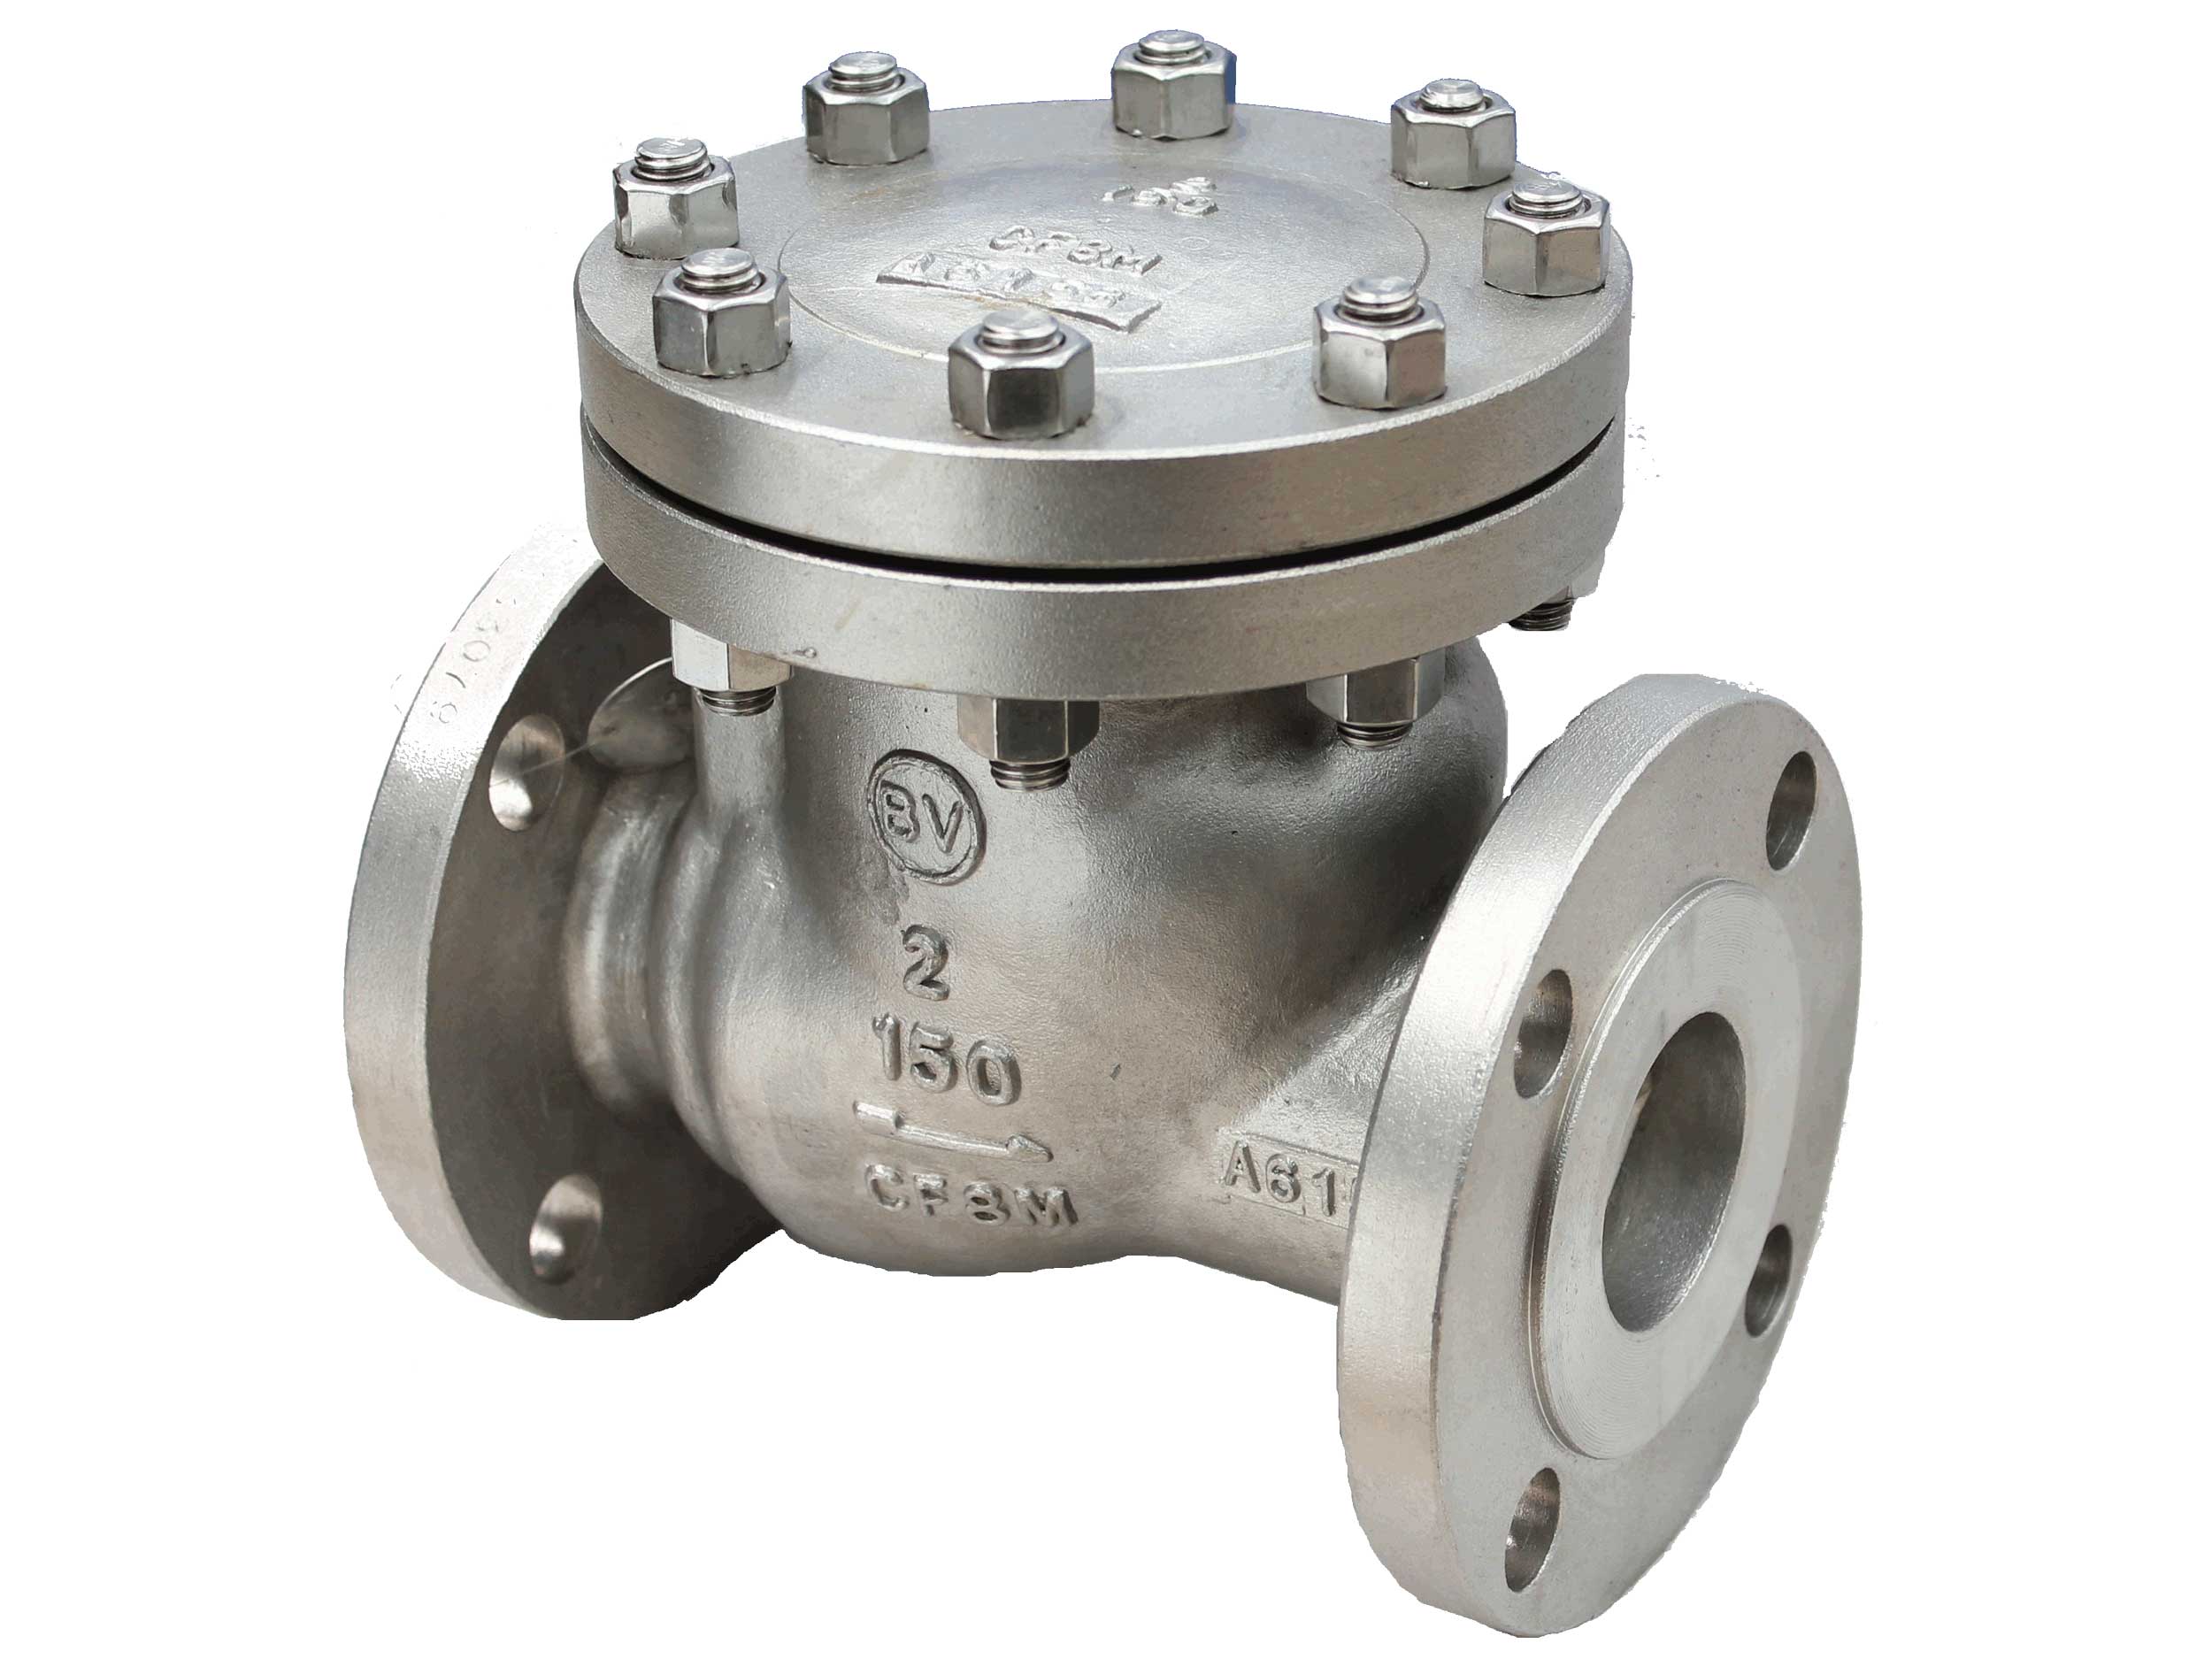 Stainless Steel Flanged swing check valve